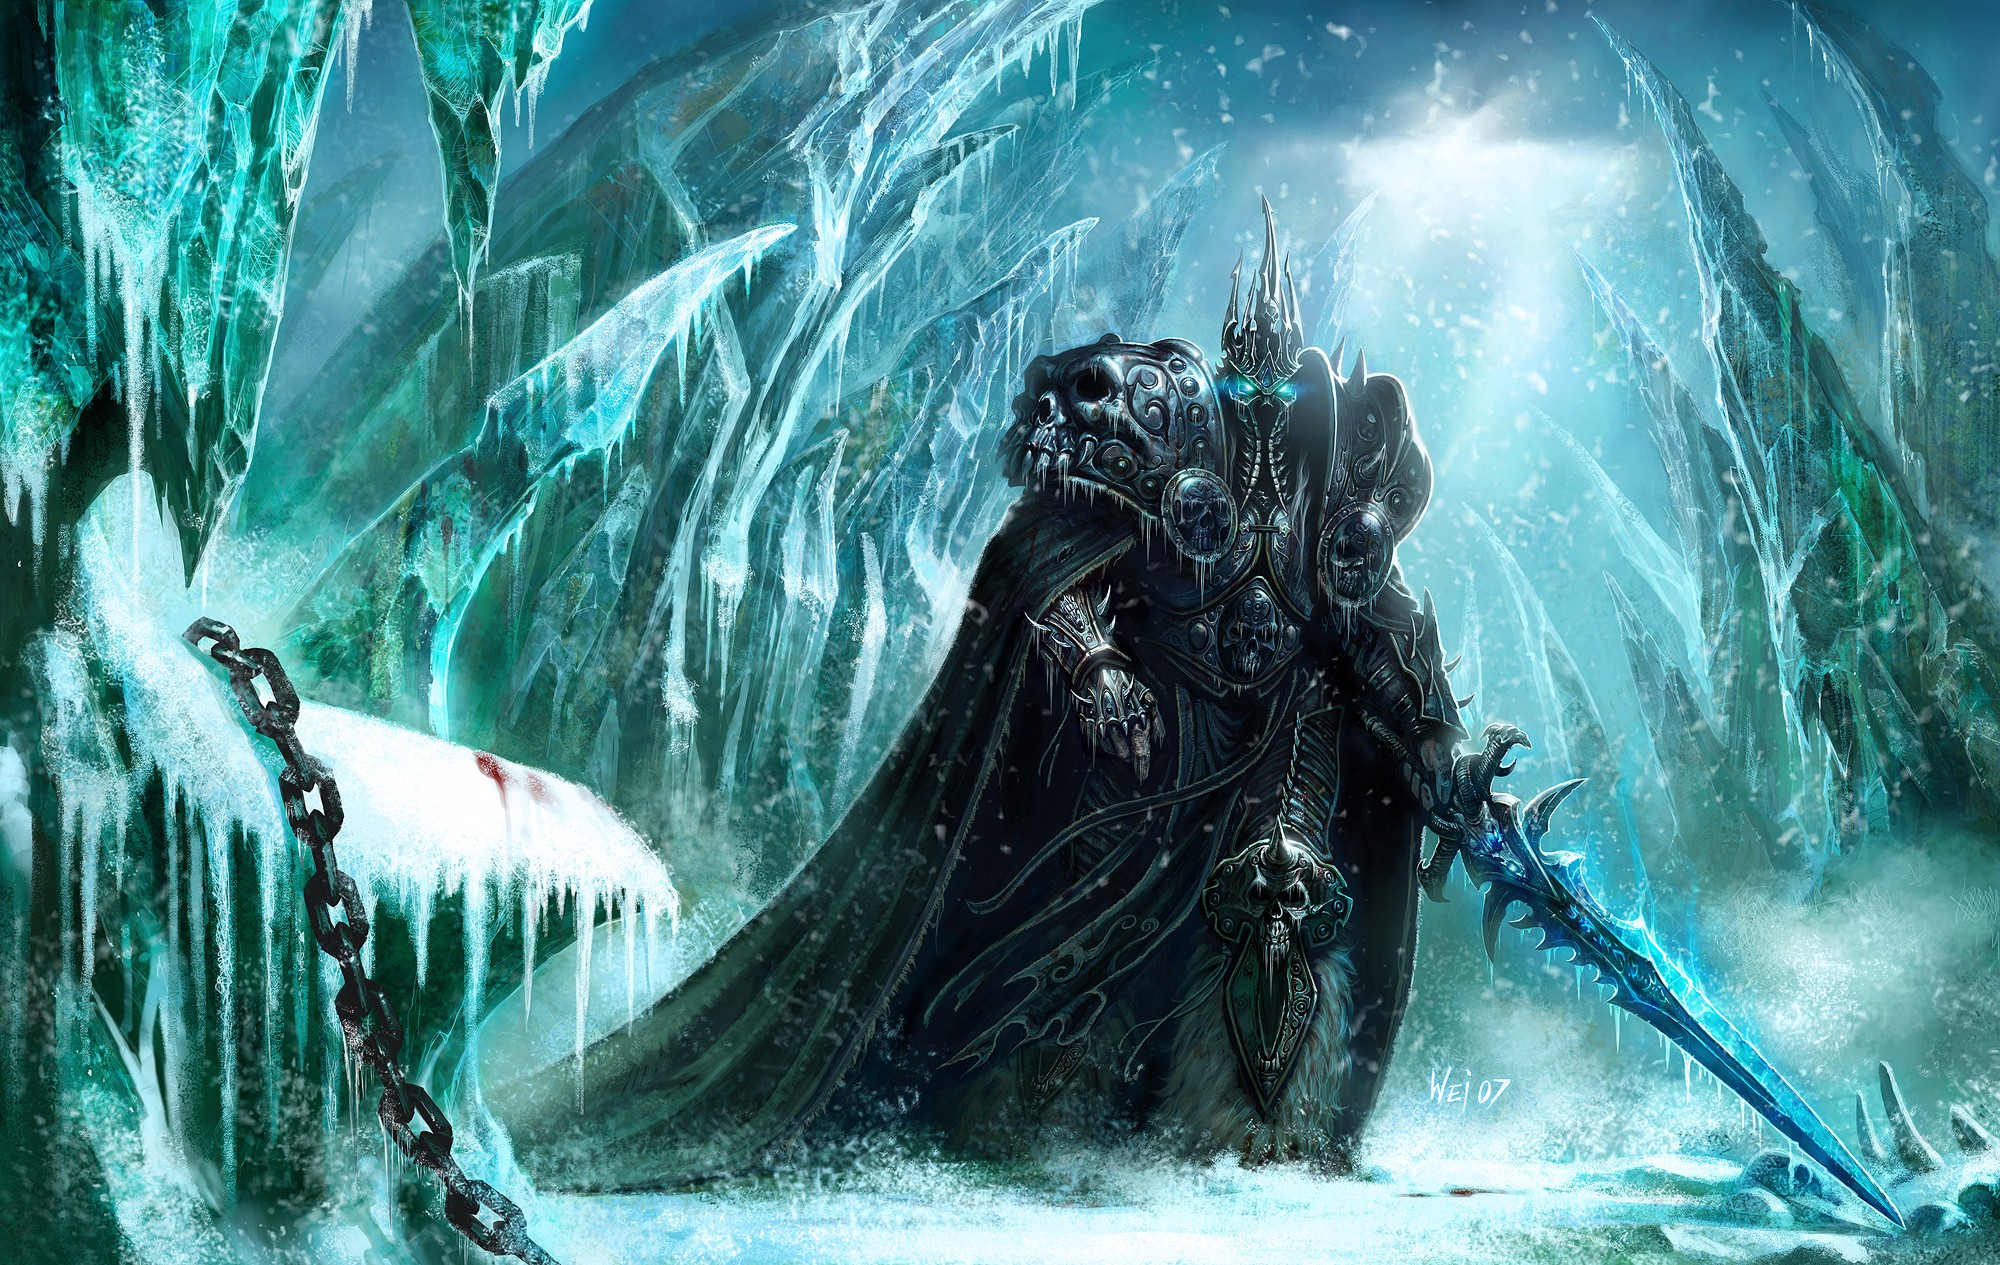 General 2000x1265 Arthas Menethil Warcraft World of Warcraft PC gaming chains ice fantasy art cyan video game art Blizzard Entertainment World of Warcraft: Wrath of the Lich King